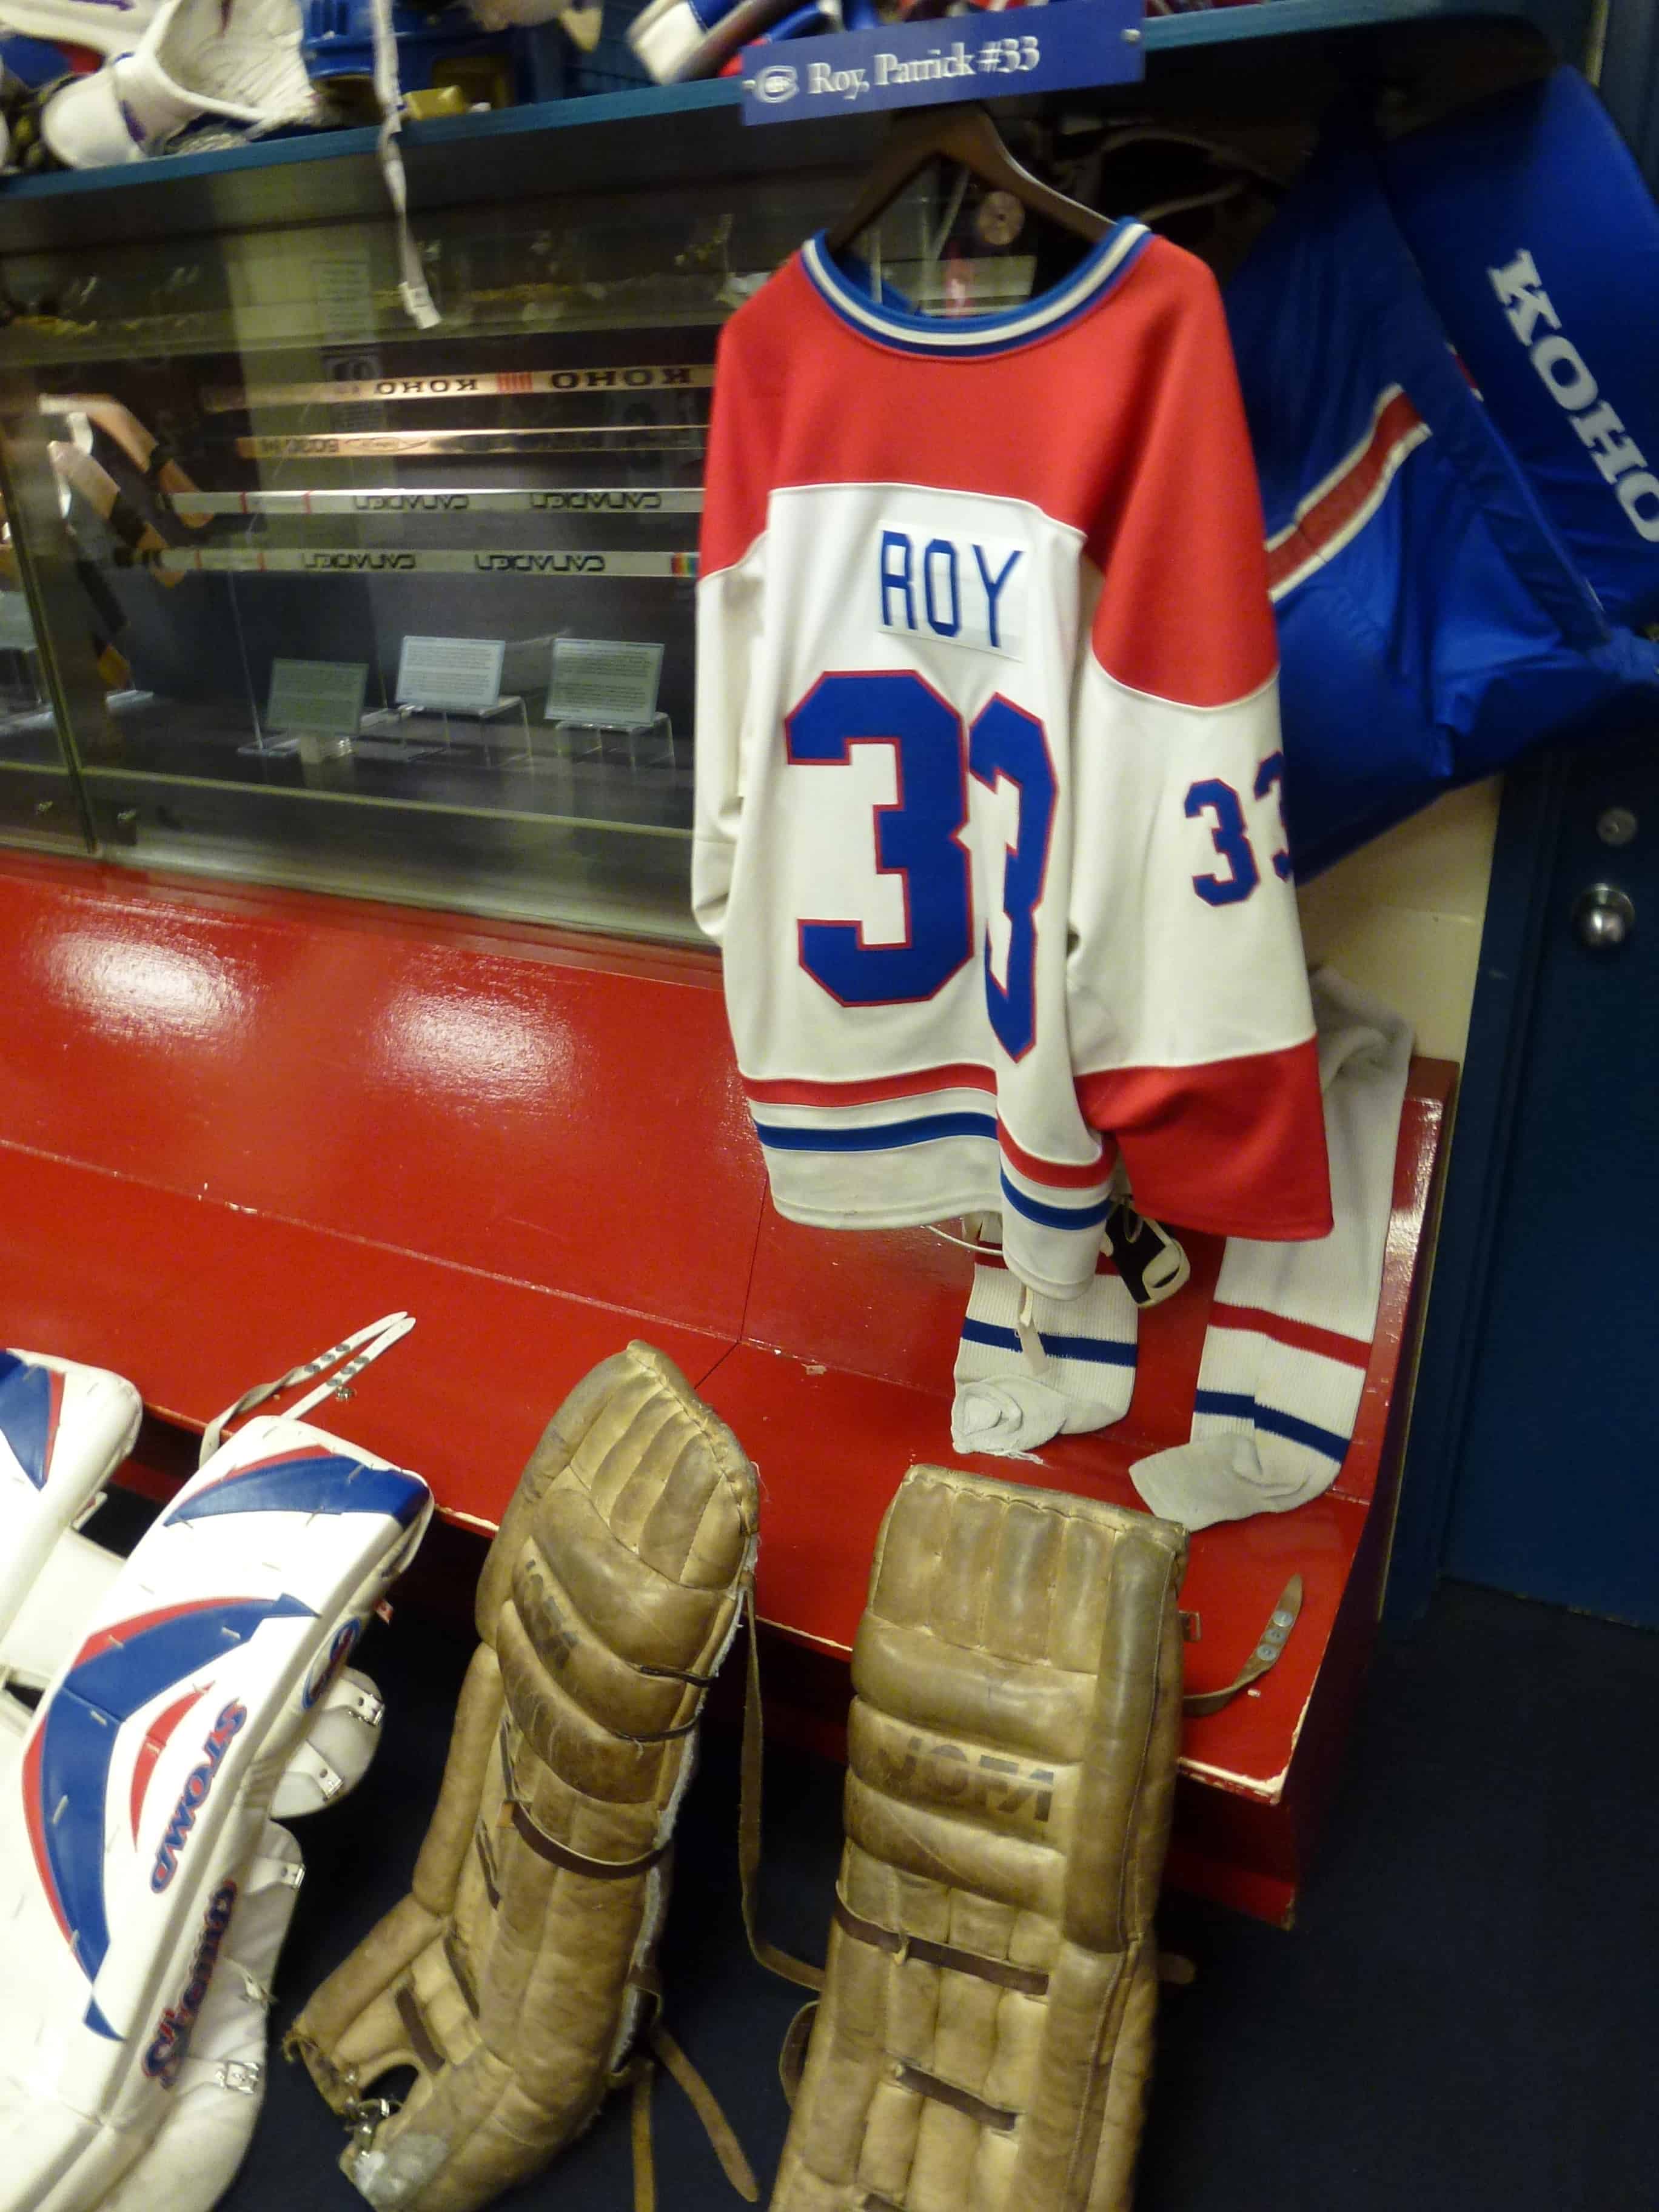 Montréal Canadiens dressing room at the Hockey Hall of Fame in Toronto, Ontario, Canada